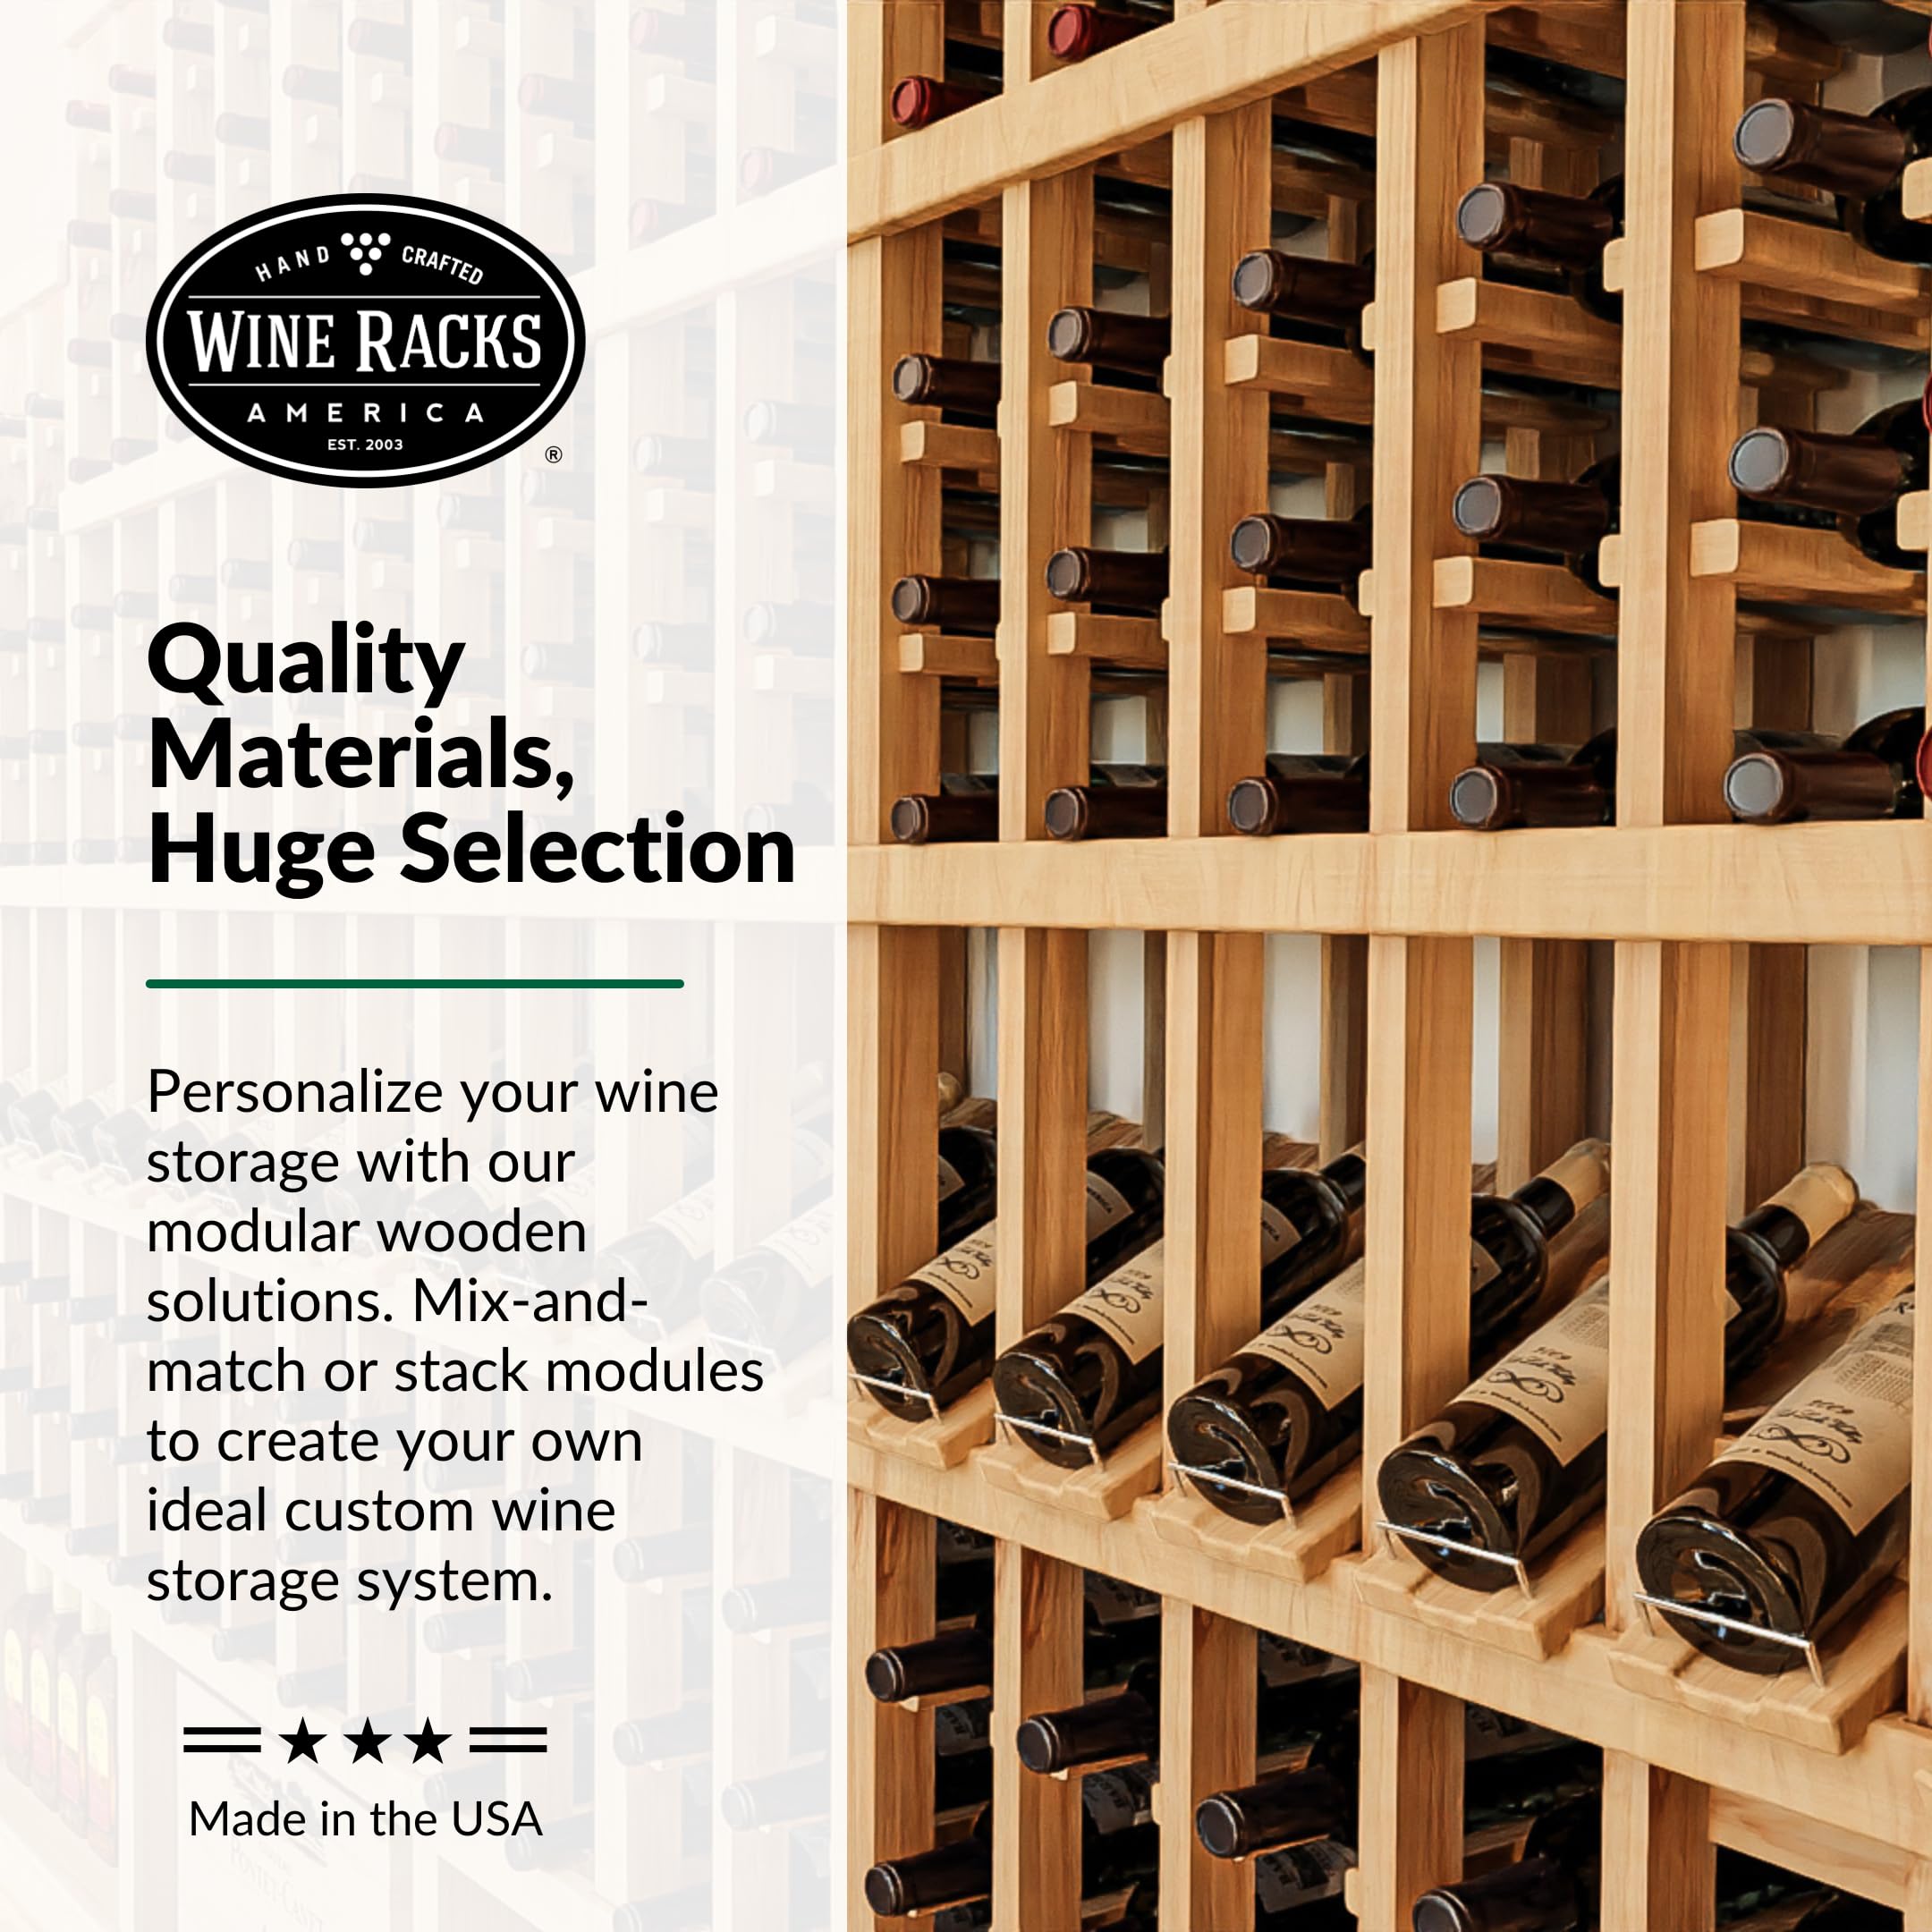 Wine Racks America Living Series Table Top Wine Rack - Durable and Modular Wine Storage System, Redwood Unstained - Holds 48 Bottles